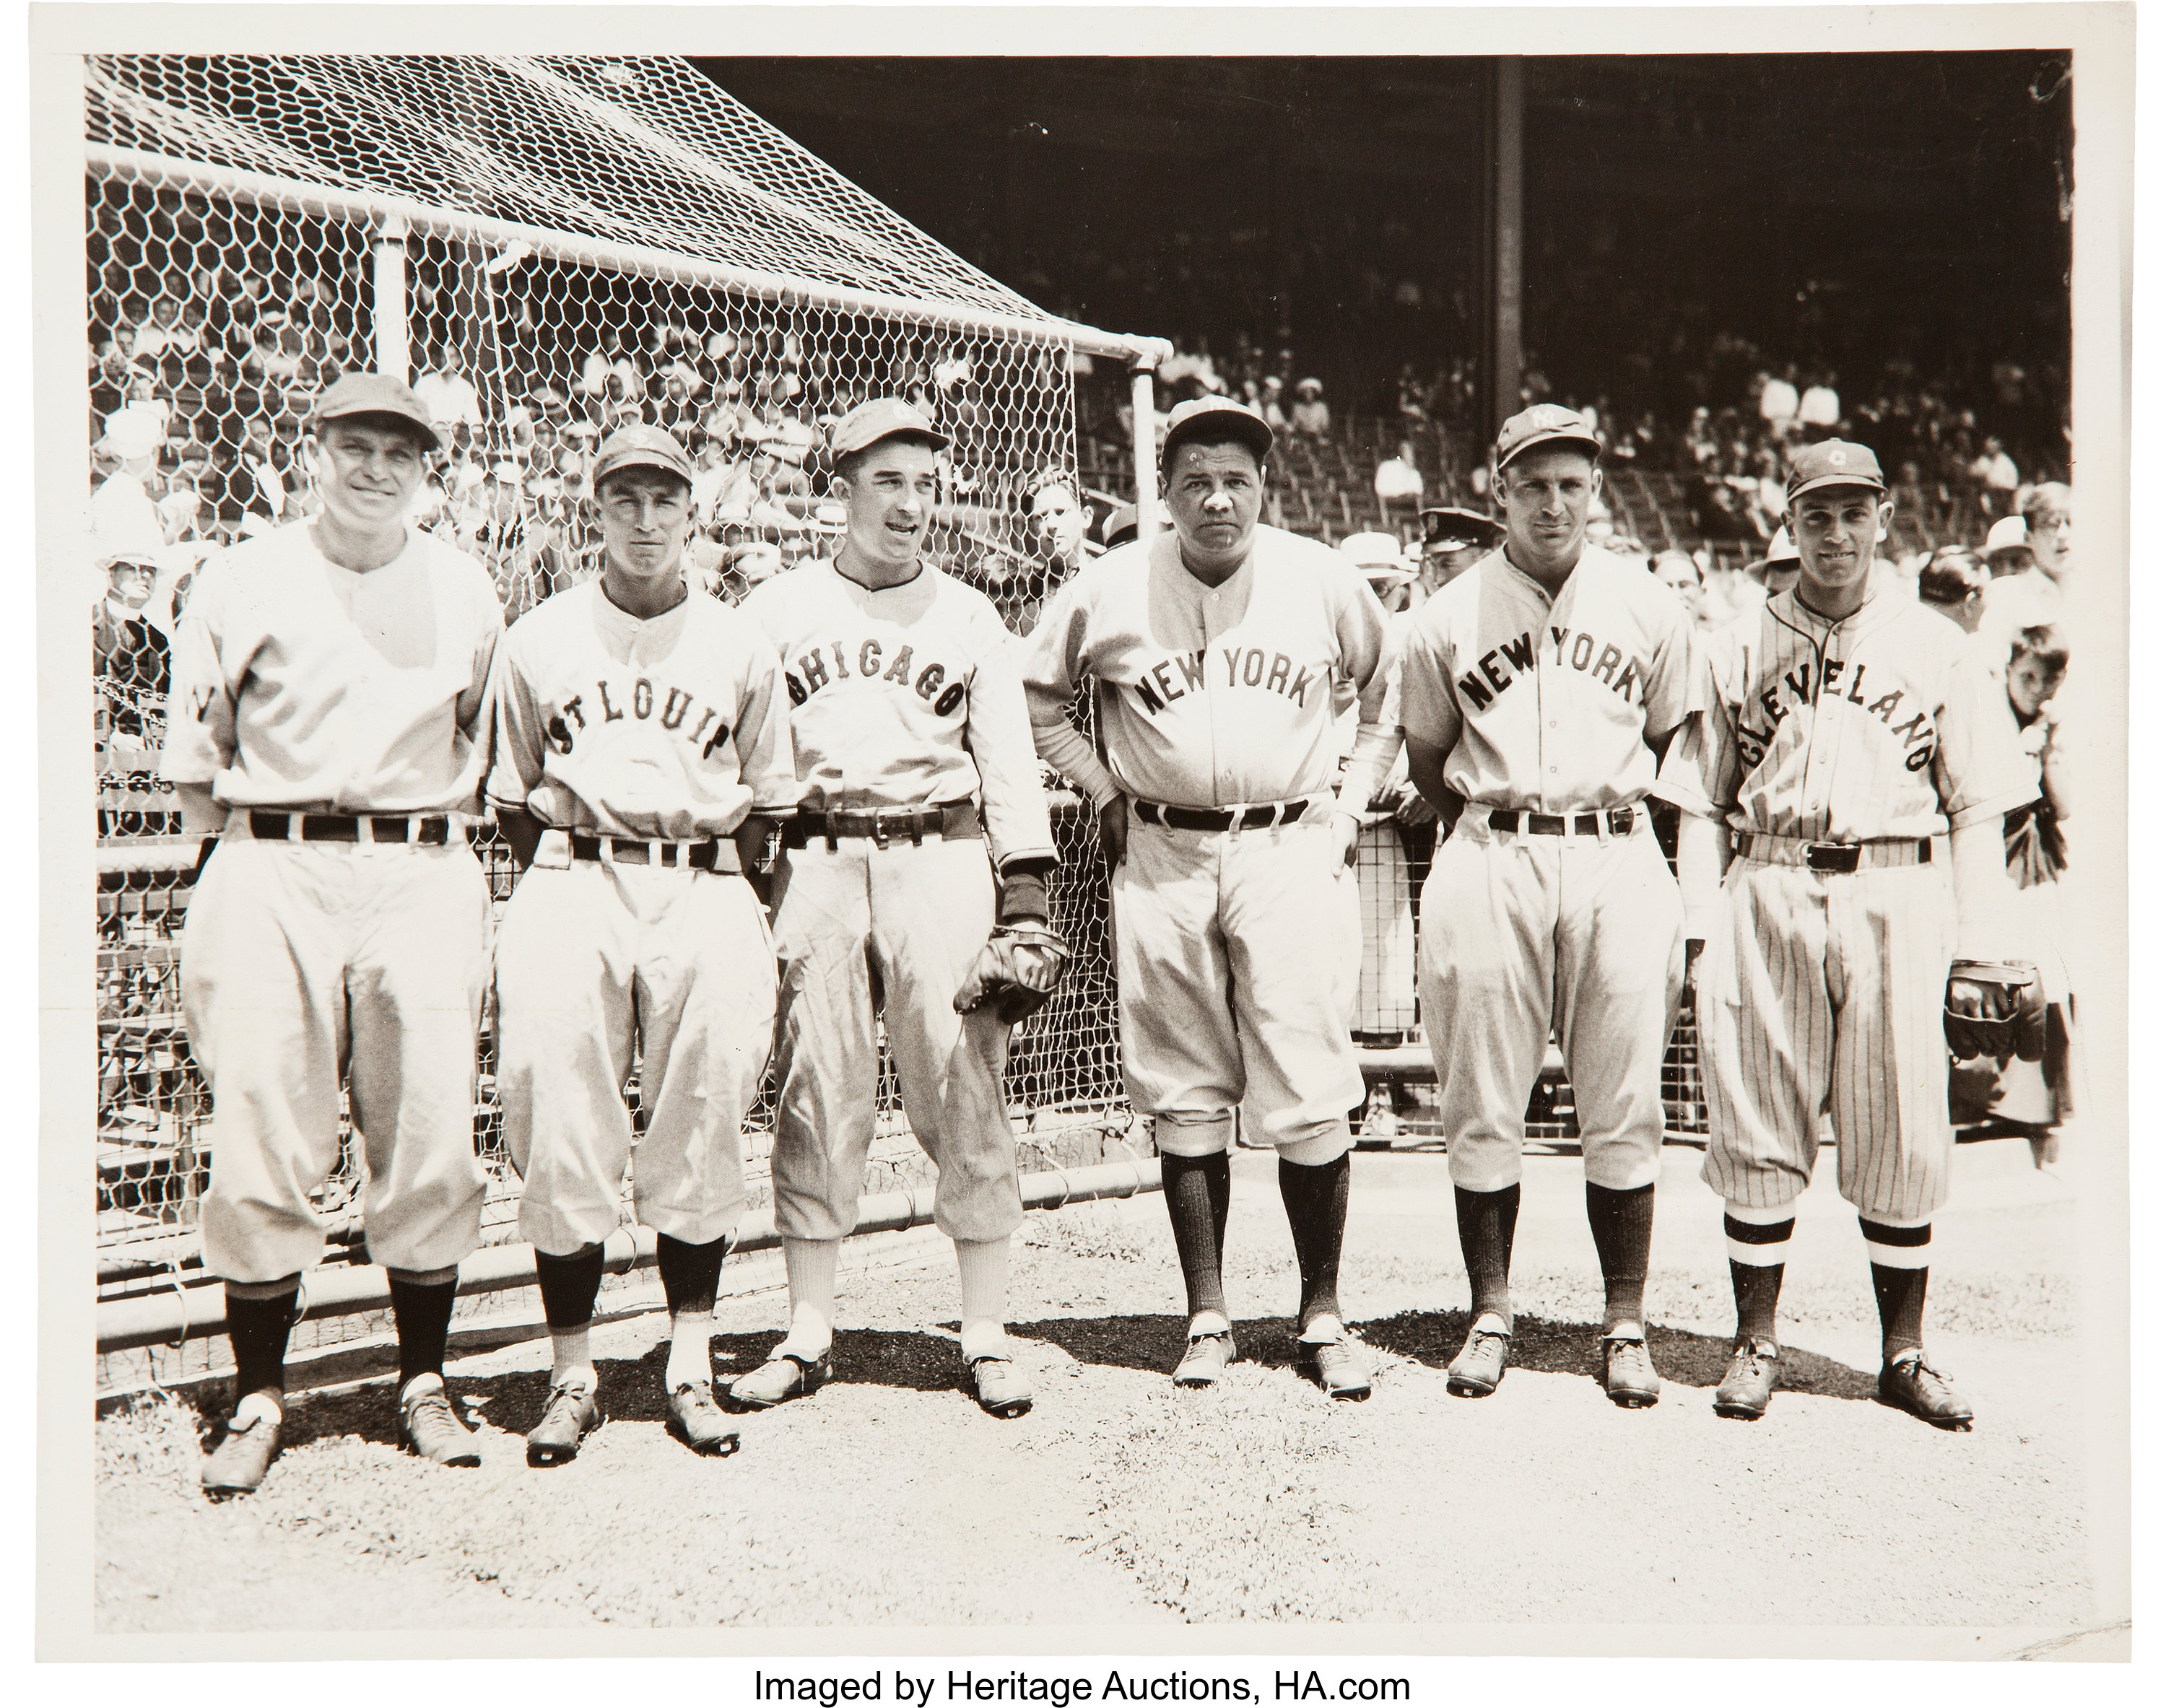 Babe Ruth with other Braves stars, File name: 08_06_010680 …